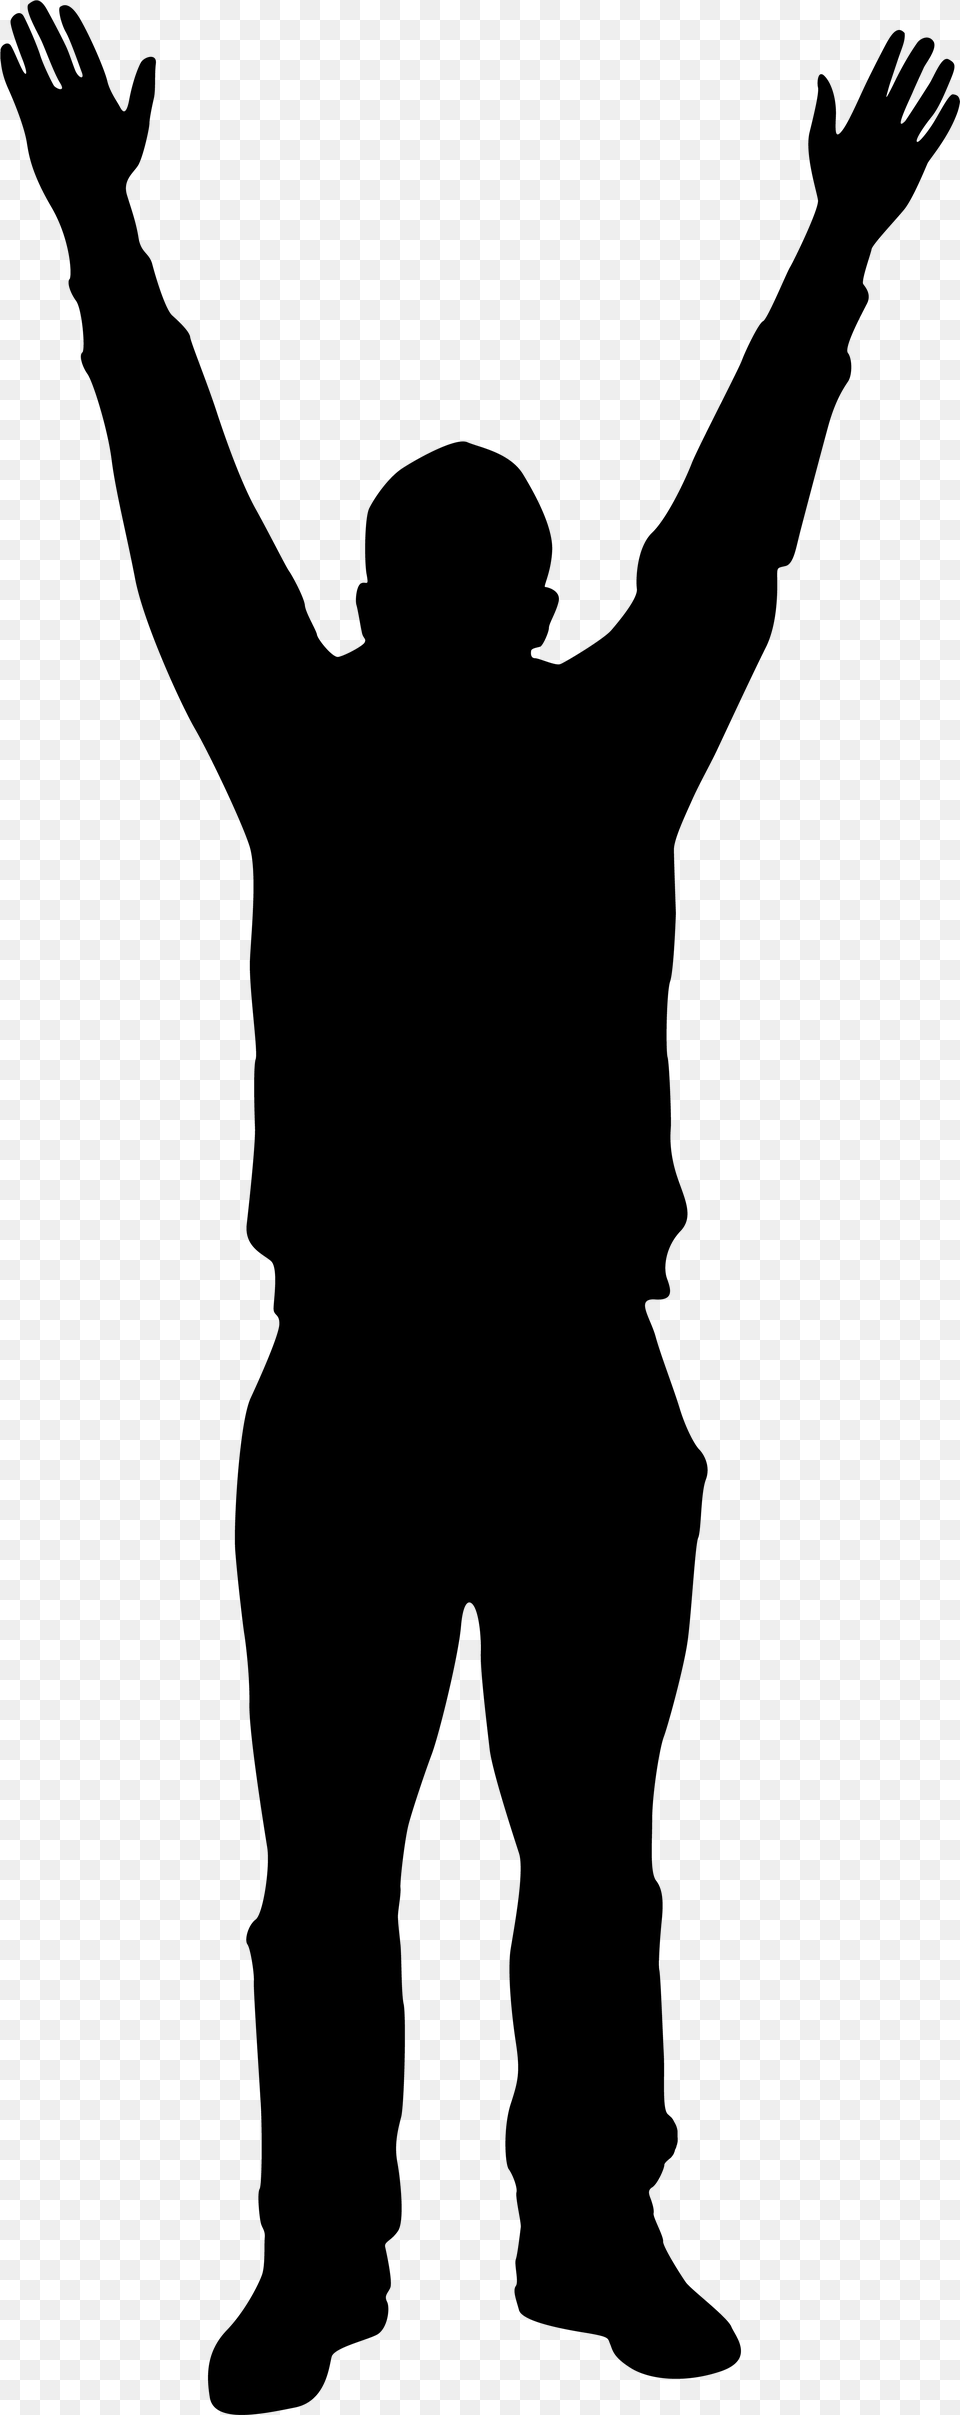 Man Hands Up Silhouette, Gray Png Image